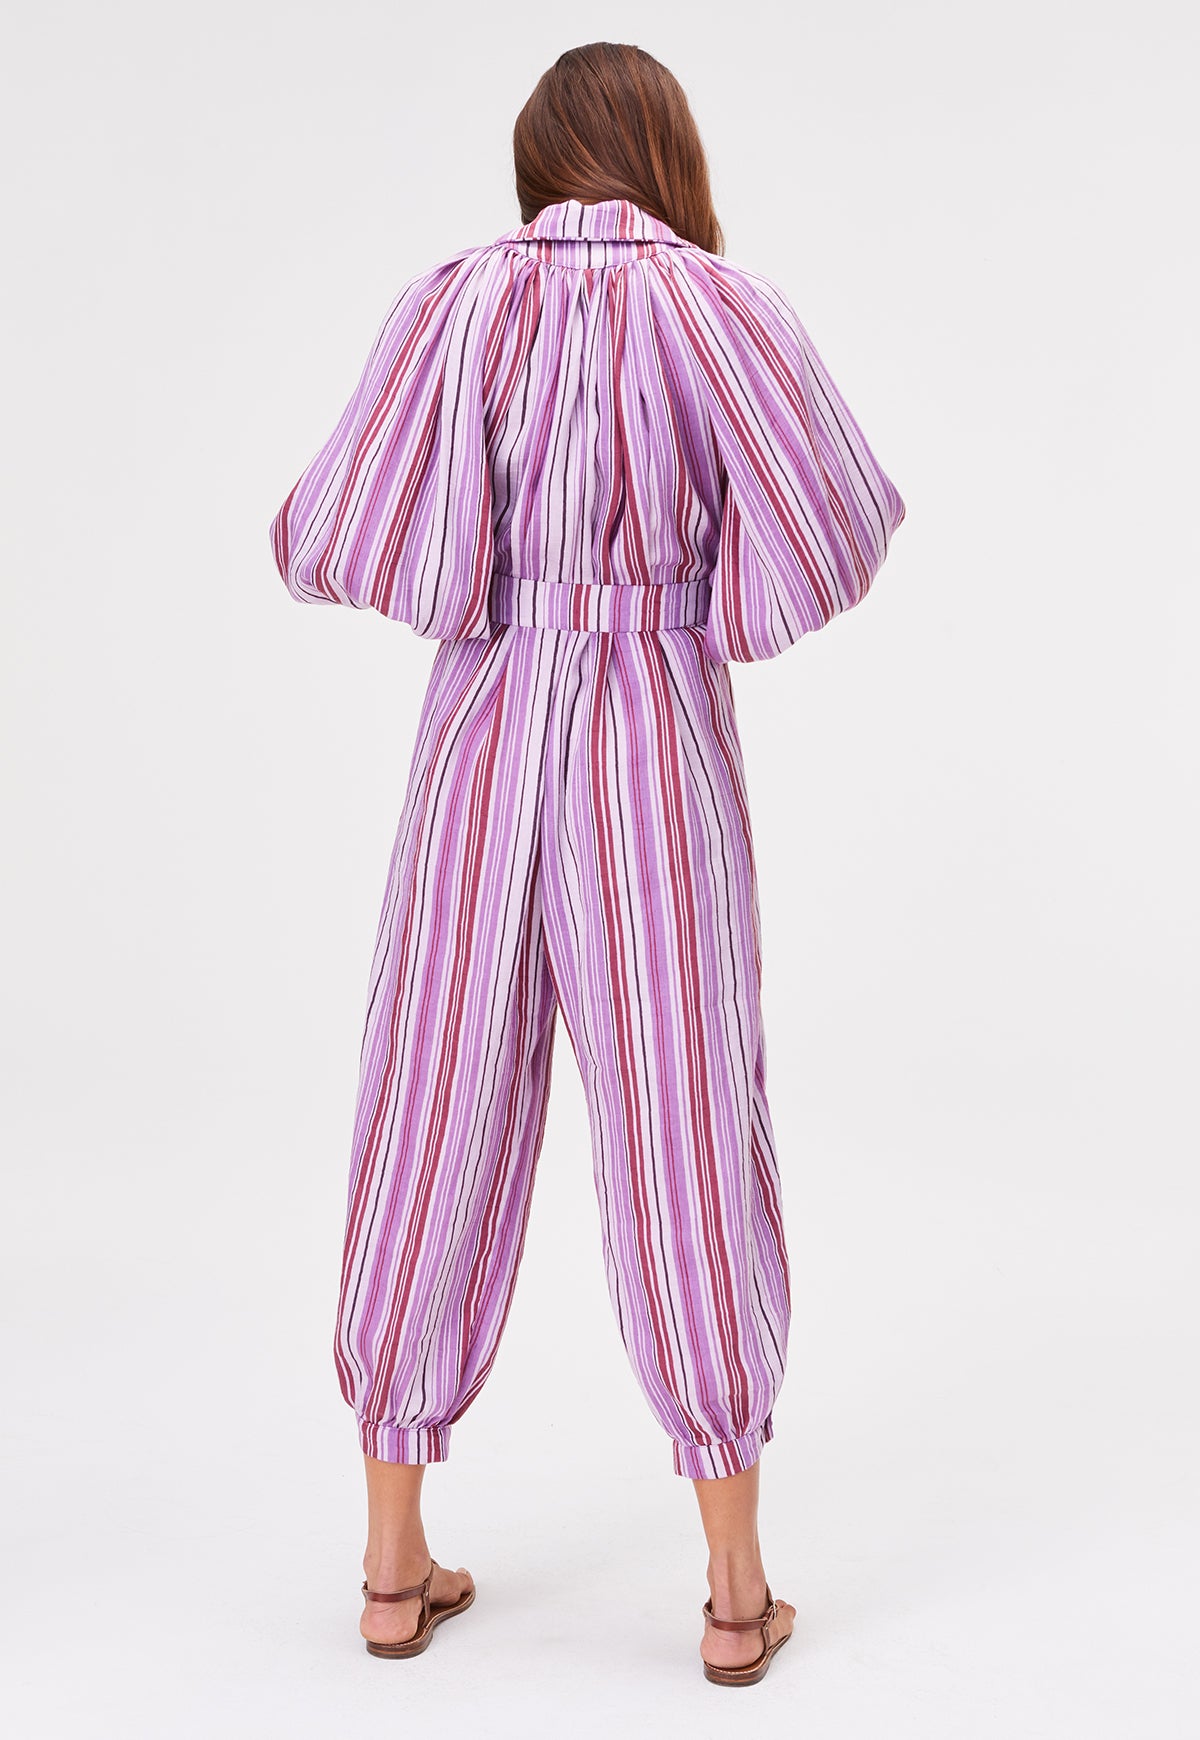 THE POET JUMPSUIT in BLUEBERRY STRIPED LINEN